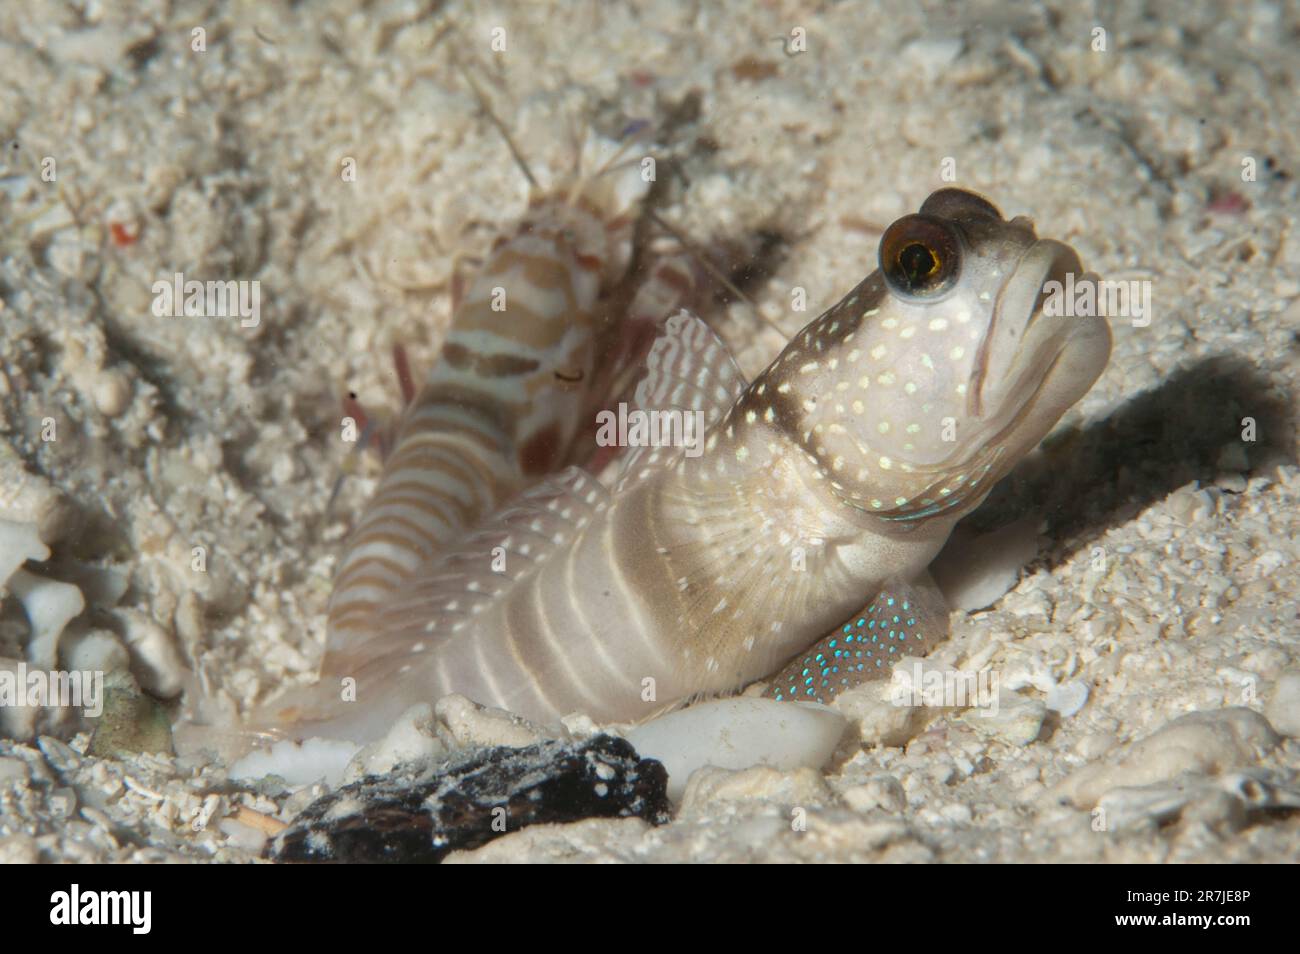 Banded Shrimpgoby, Cryptocentrus cinctus, with Djibouti Snapping Shrimp, Alpheus djiboutensis, by hole, Raja Ampat, West Papua, Indonesia Stock Photo